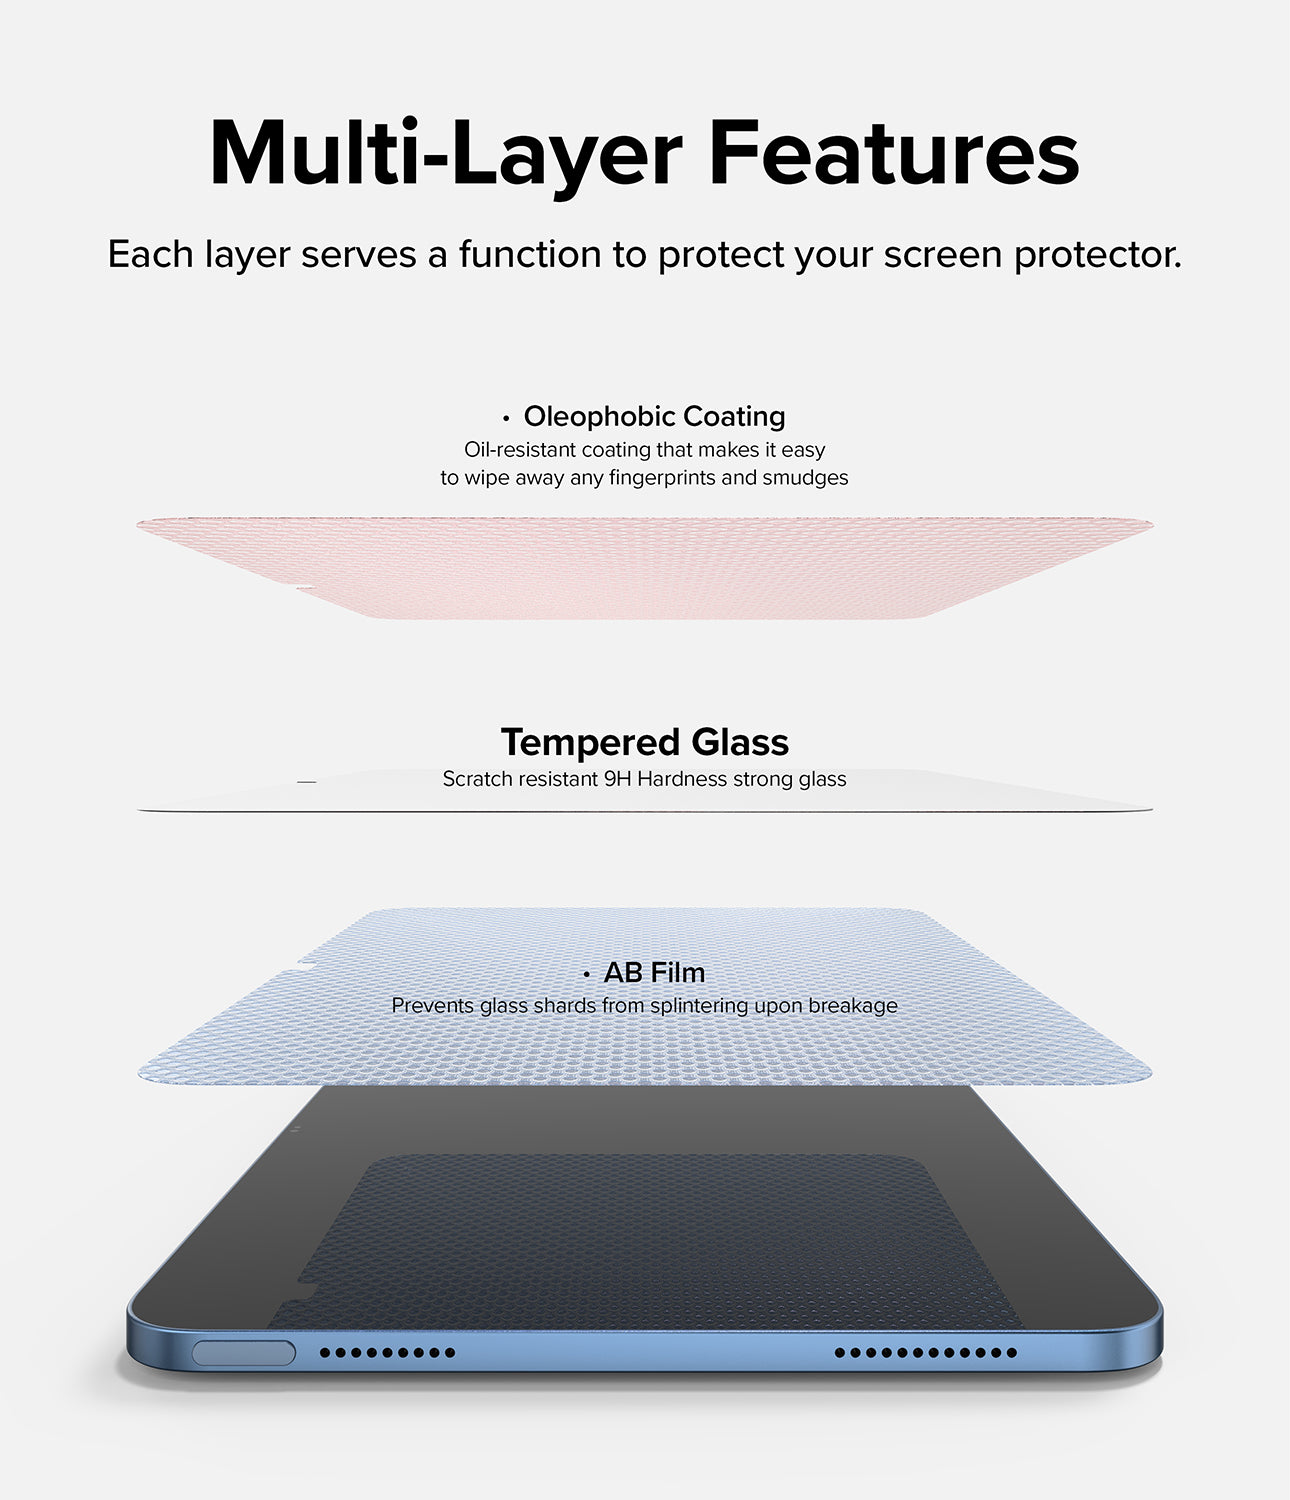 Multi-Layer Features - Each layer serves a function to protect your screen protector. Oleophobic Coating / Tempered Glass / AB Film